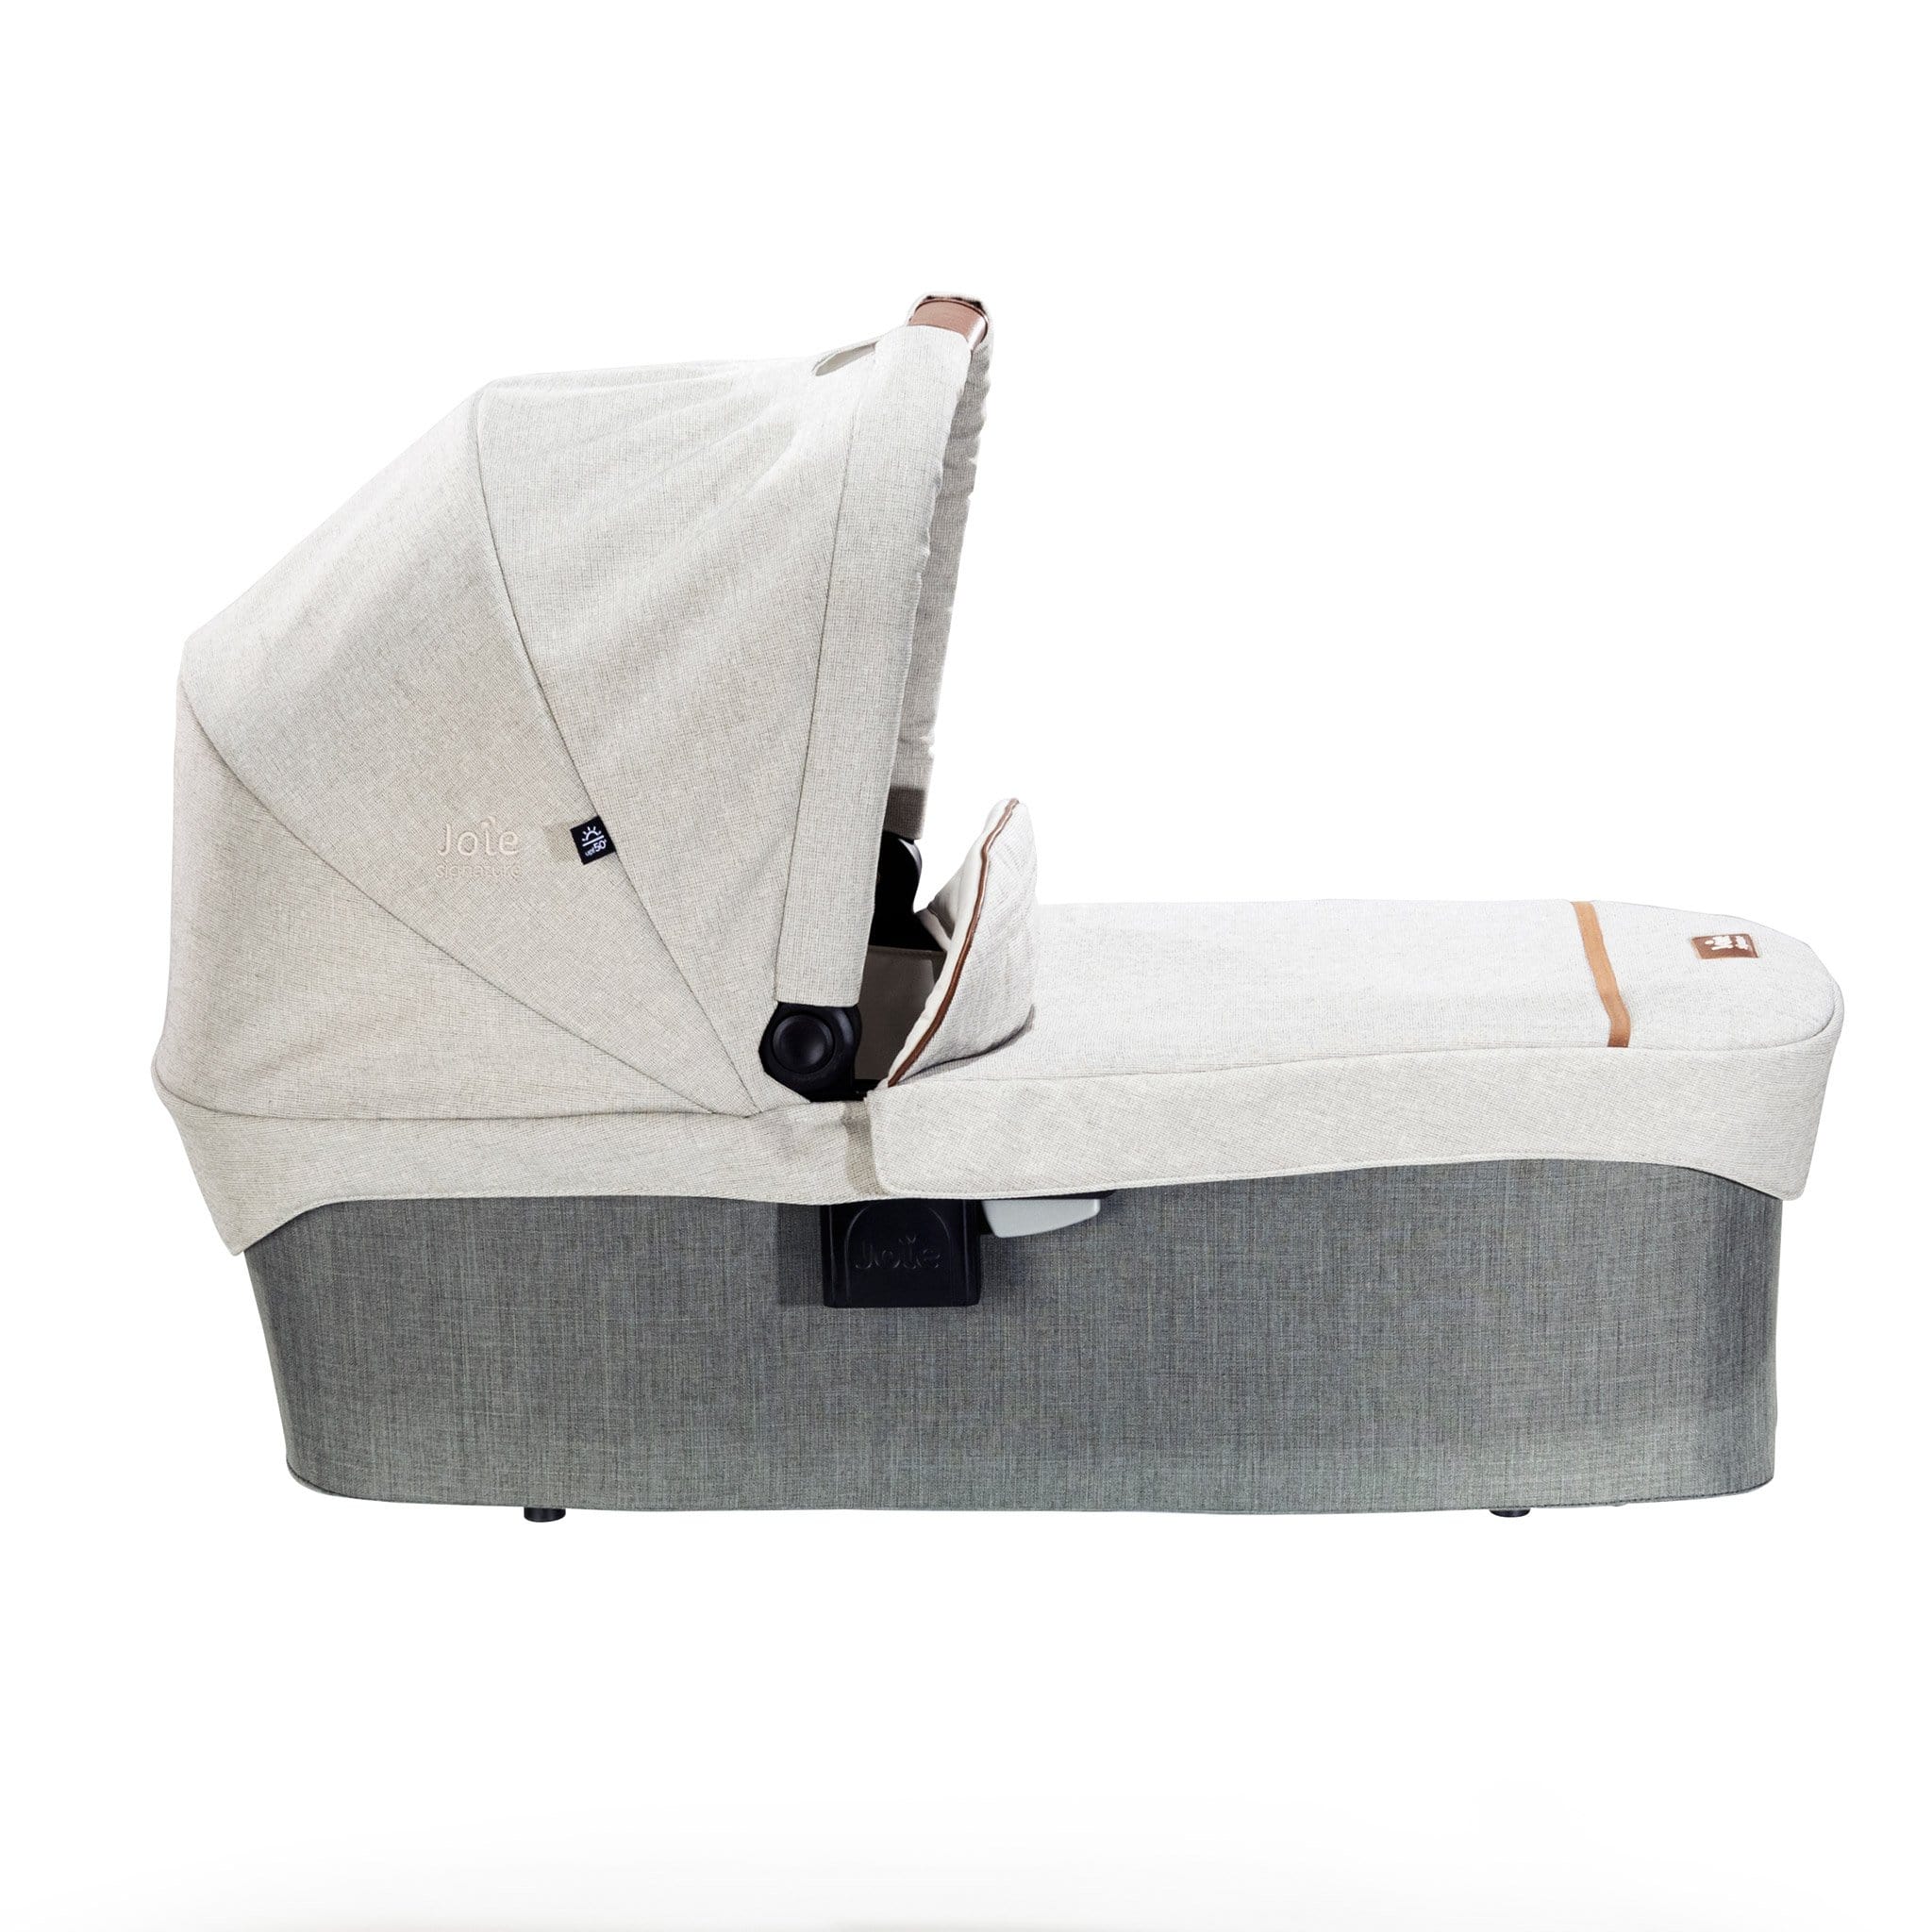 Joie Ramble Signature Carrycot Oyster A1112PBOYS000 5056080611358